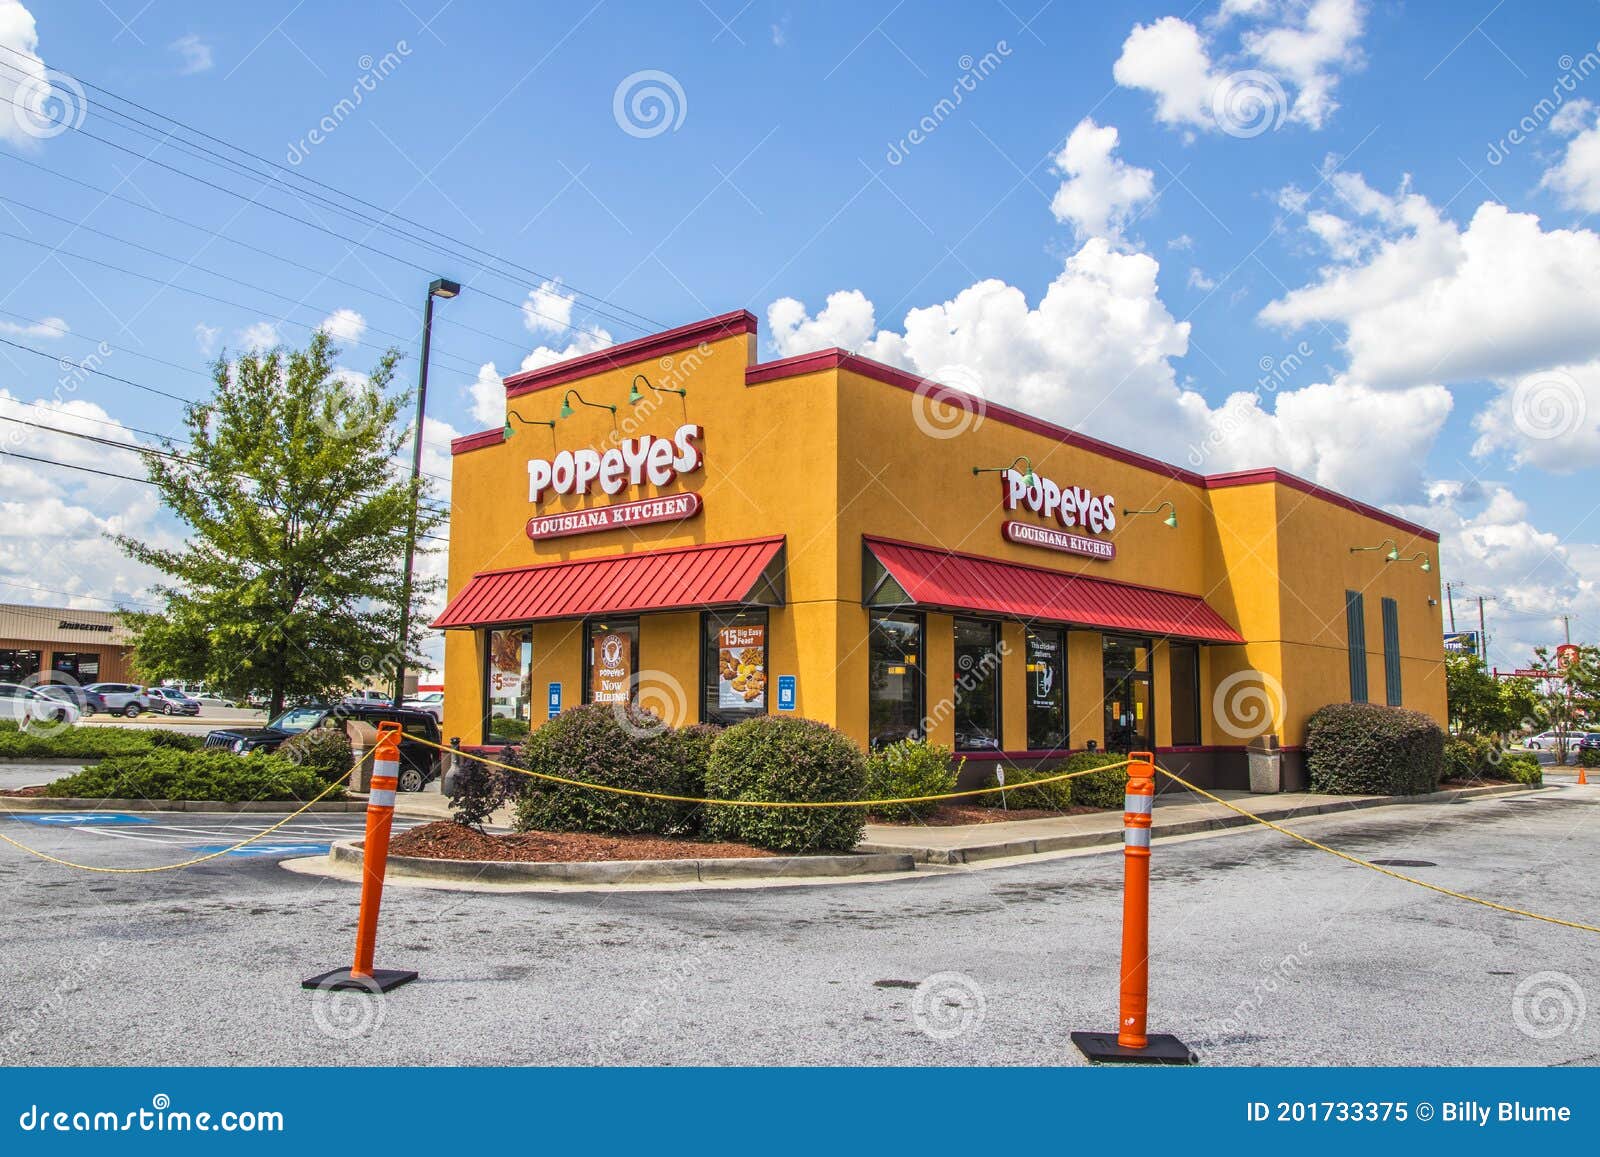 223 Popeyes Chicken Photos Free Royalty Free Stock Photos From Dreamstime